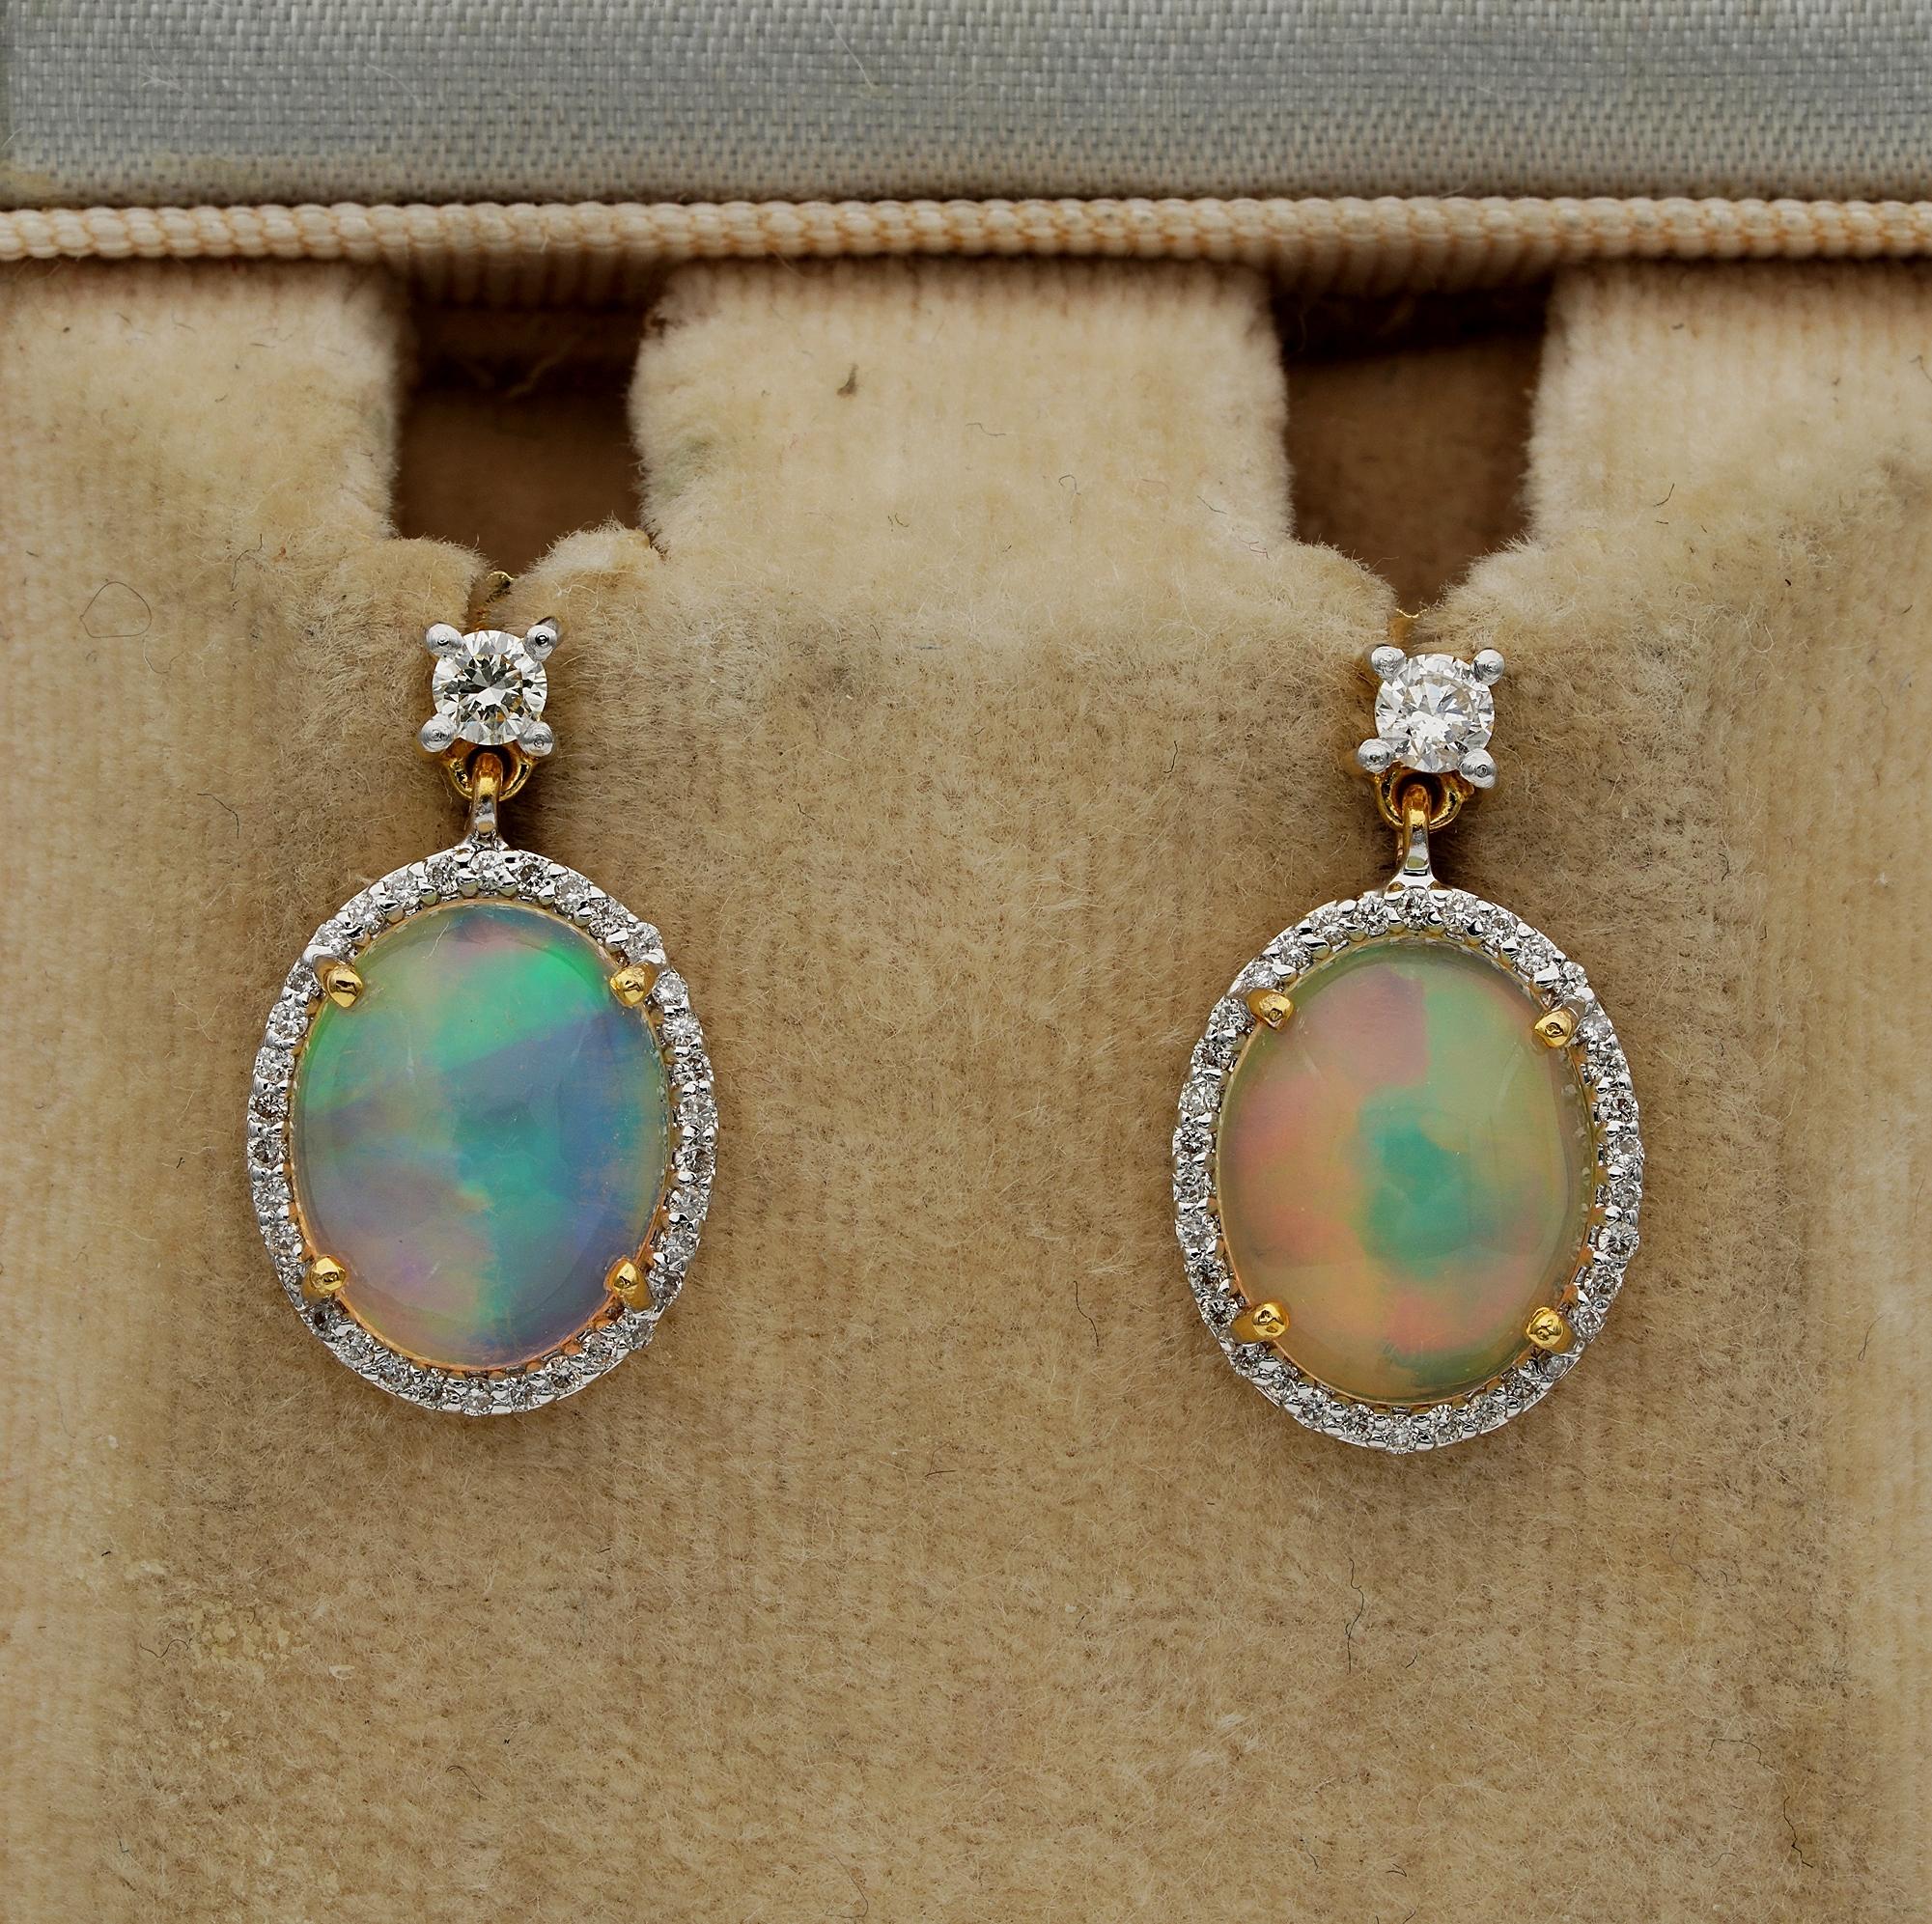 Magic Rainbow Dropping from Ears
Mesmerizing Opals are the star of these ear drops
Designed as swinging oval drops with two Opals surrounded by a halo of Diamonds topped by a small solitaire – hand crafted of solid 18 KT gold
Two deep cut natural